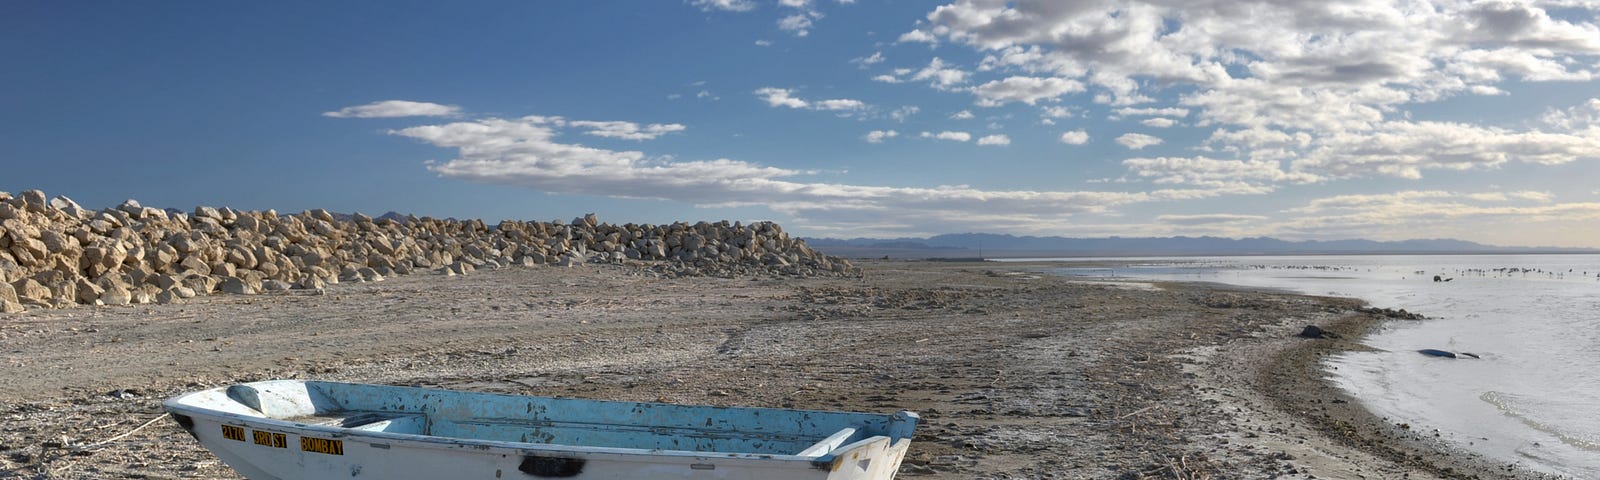 A rundown boat beached on the rocky, fish covered shores of the Salton Sea.